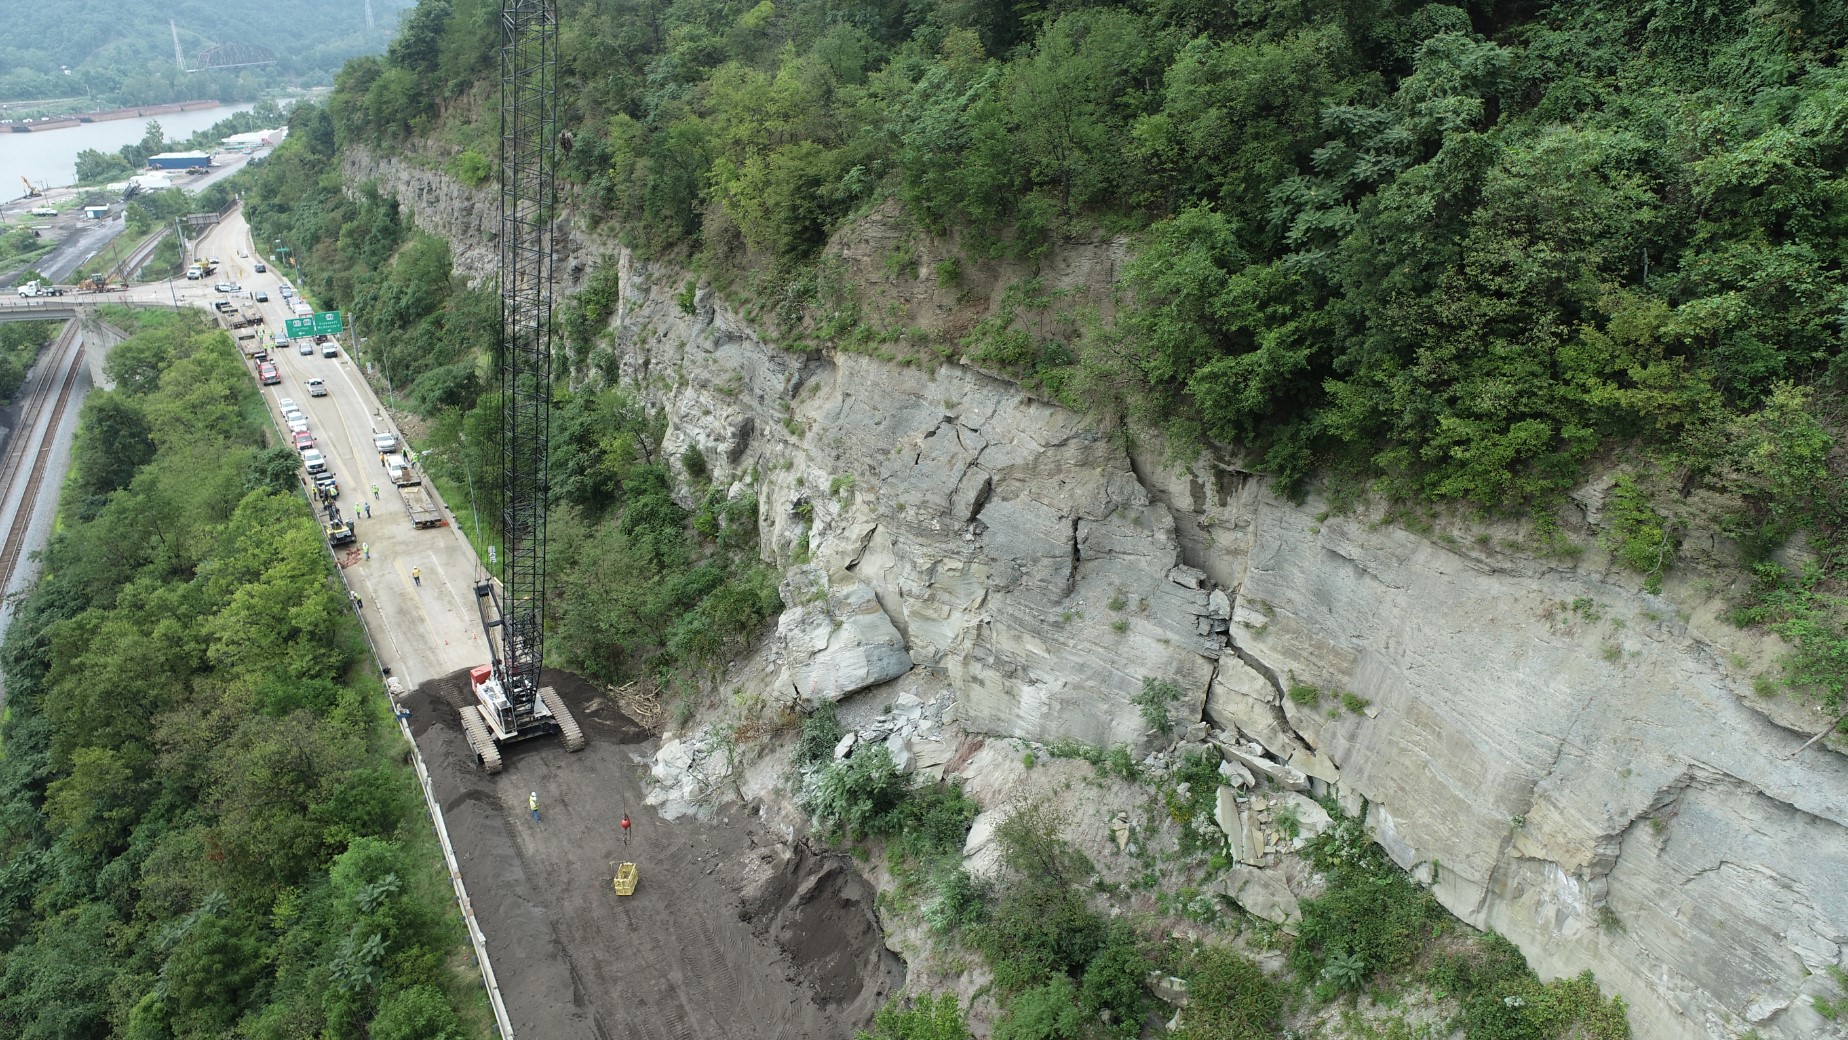 Overhead view of roadwork near Elizabeth, Allegheny County, captured by a drone. Road appears to be built on a level section of a large mountain.